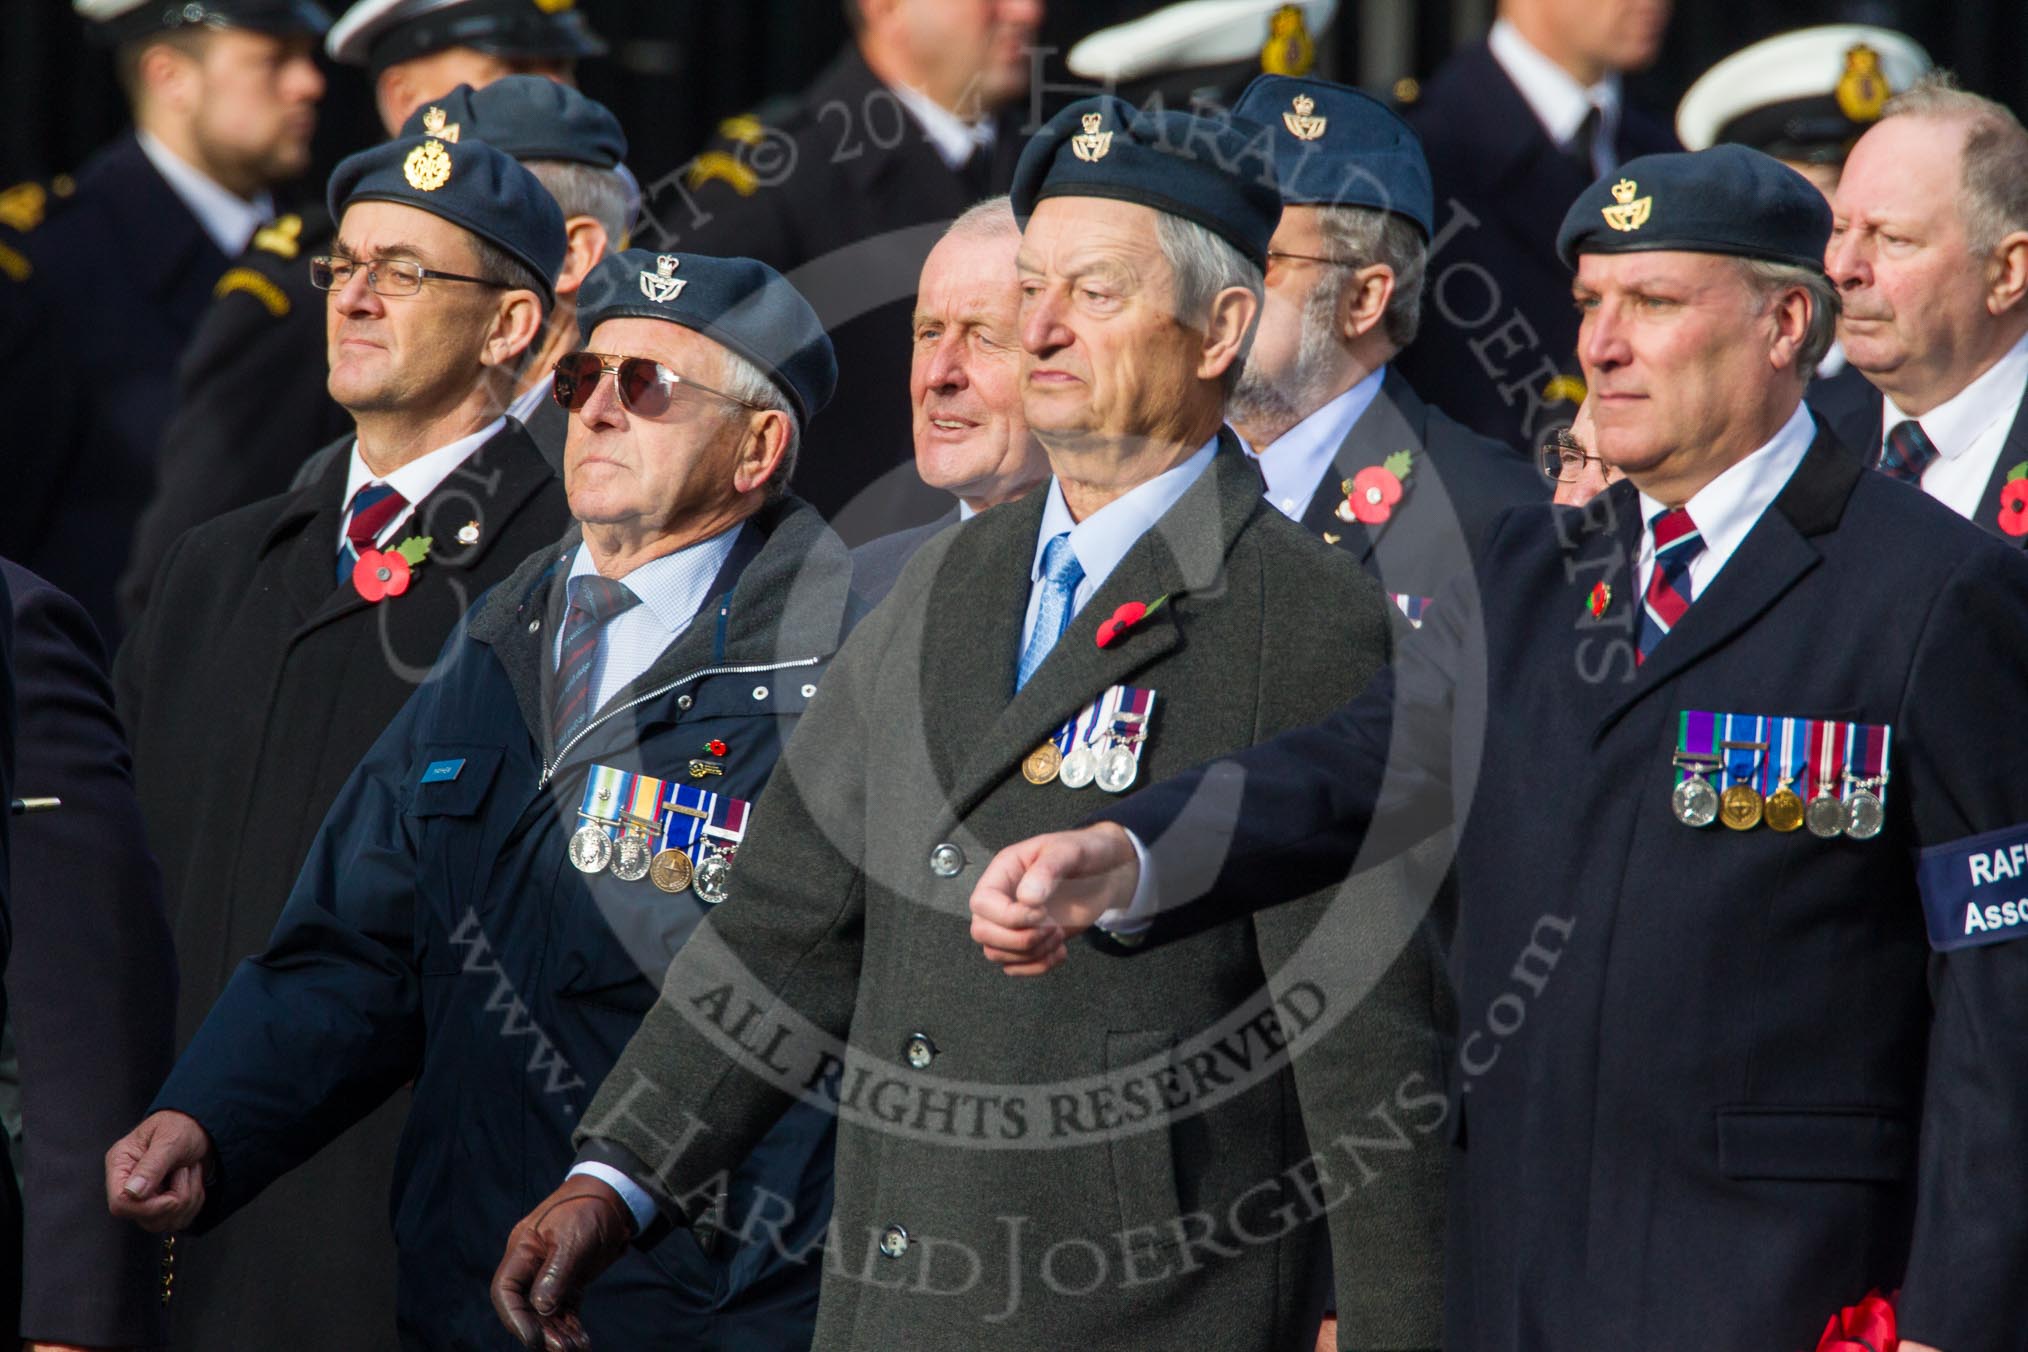 Remembrance Sunday at the Cenotaph in London 2014: Group C6 - RAFLING Association.
Press stand opposite the Foreign Office building, Whitehall, London SW1,
London,
Greater London,
United Kingdom,
on 09 November 2014 at 11:39, image #110